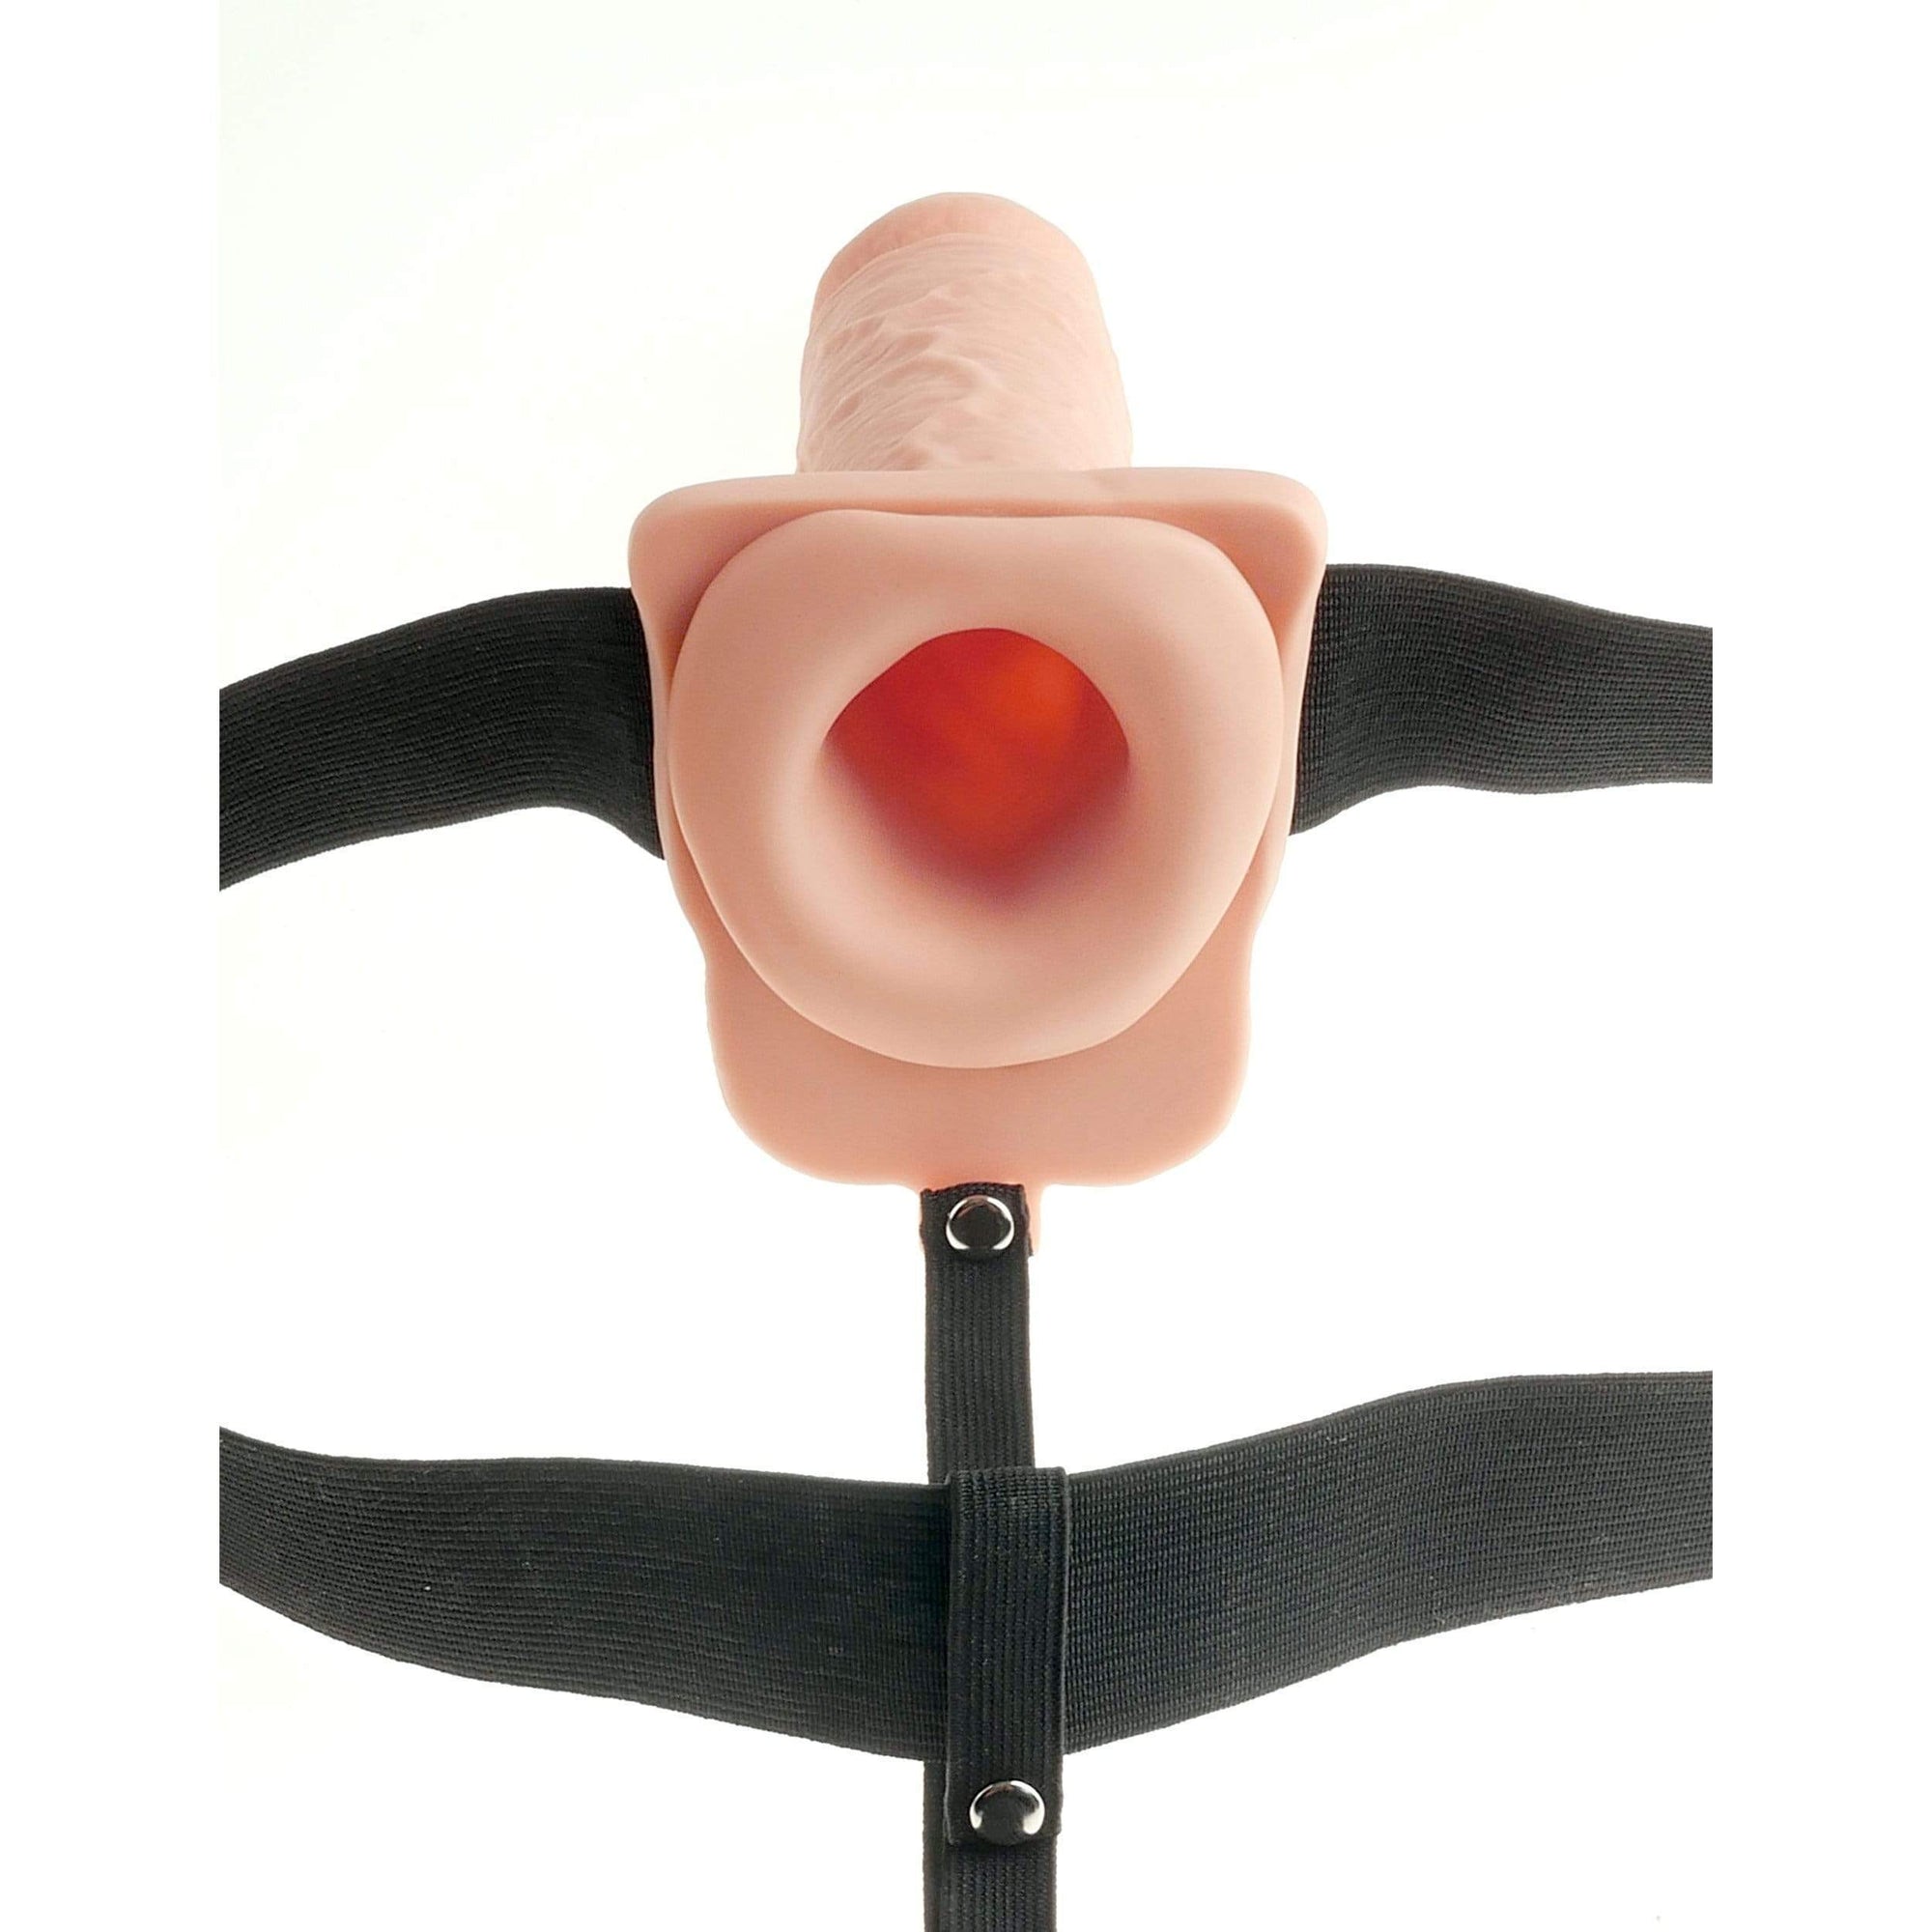 Pipedream - Fetish Fantasy Hollow Rechargeable Strap On with Balls 7" (Beige) Strap On with Hollow Dildo for Male (Vibration) Non Rechargeable 603912756524 CherryAffairs